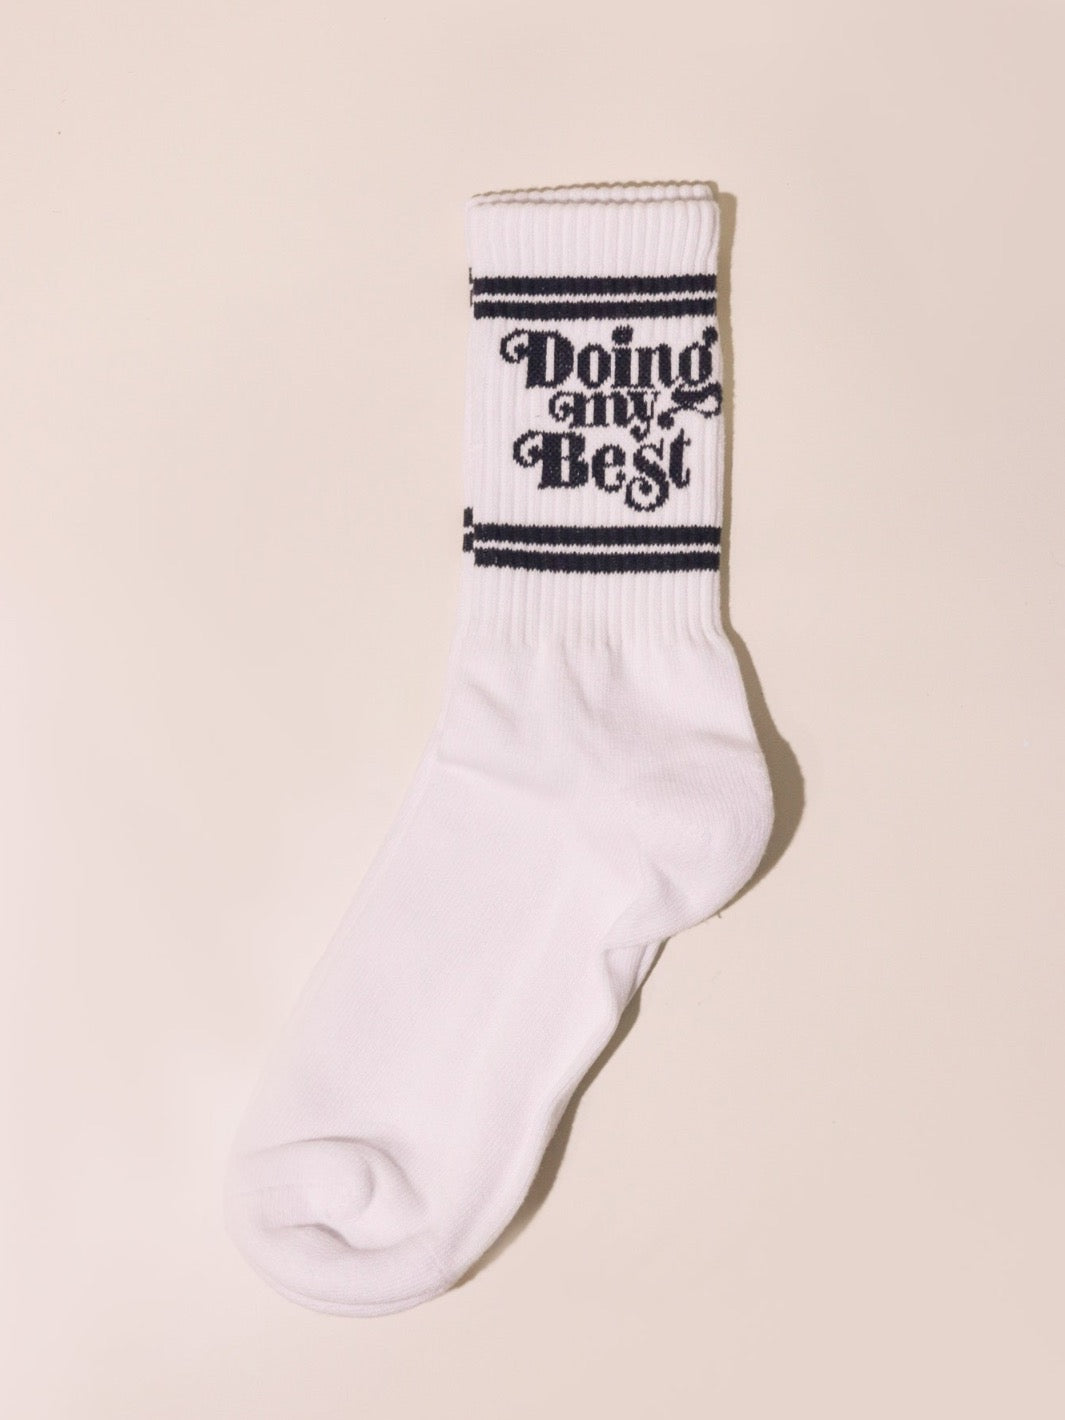 31 Ridiculously Funny Socks For Men That Guarantee LOLs From Head